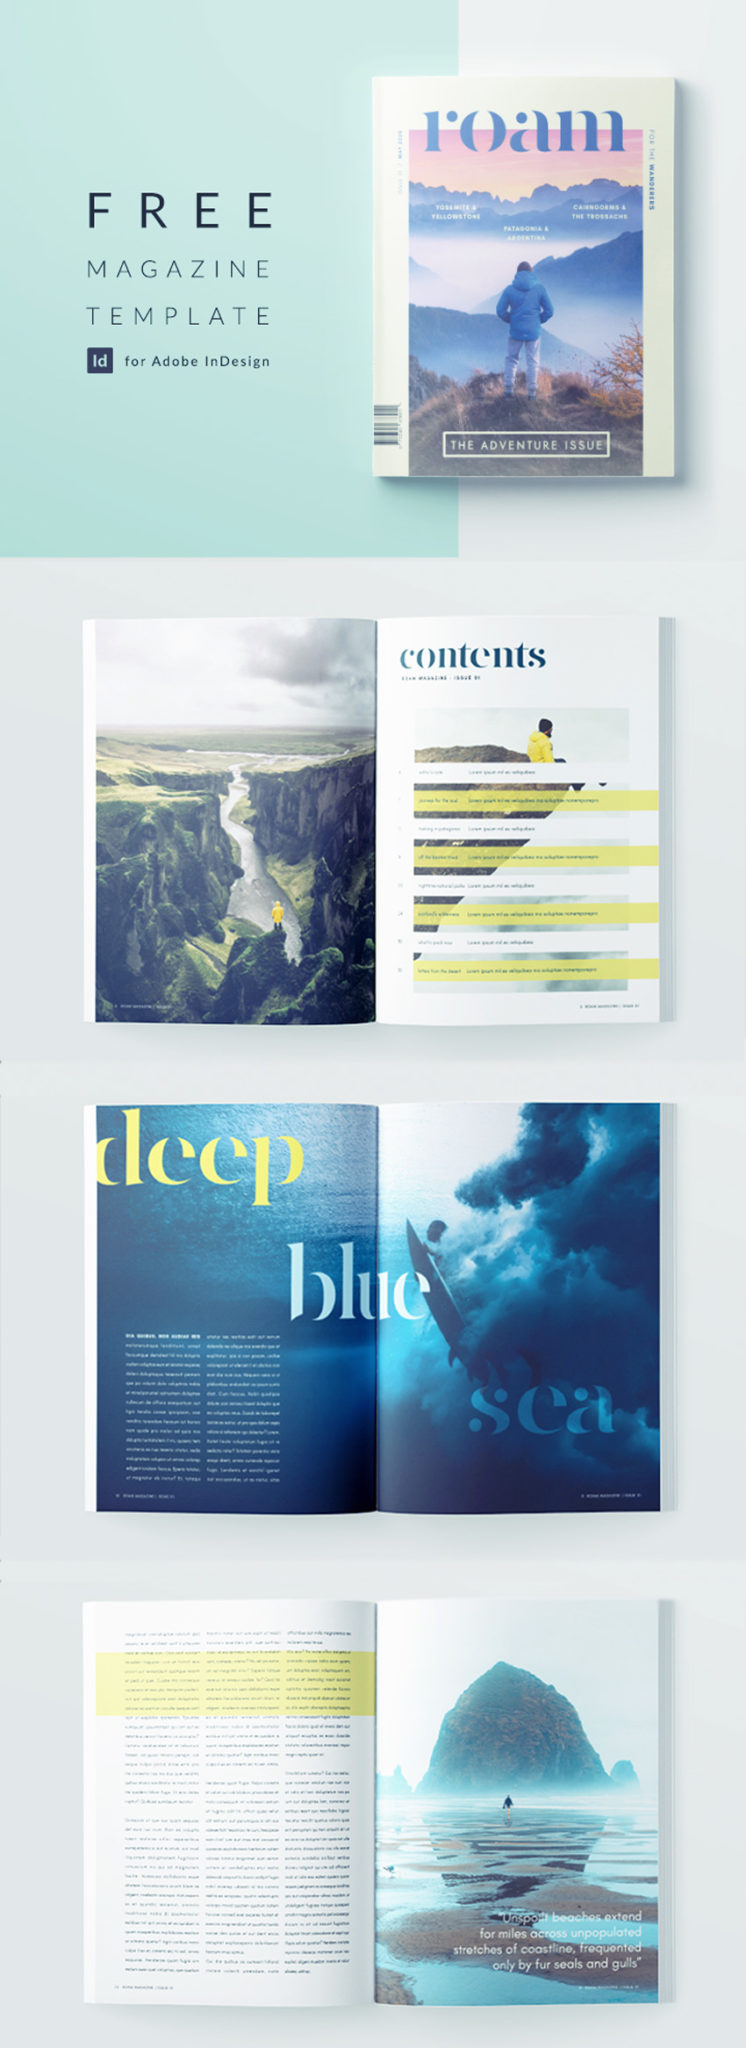 free indesign magazine template - download this professionally designed template for an indesign travel magazine